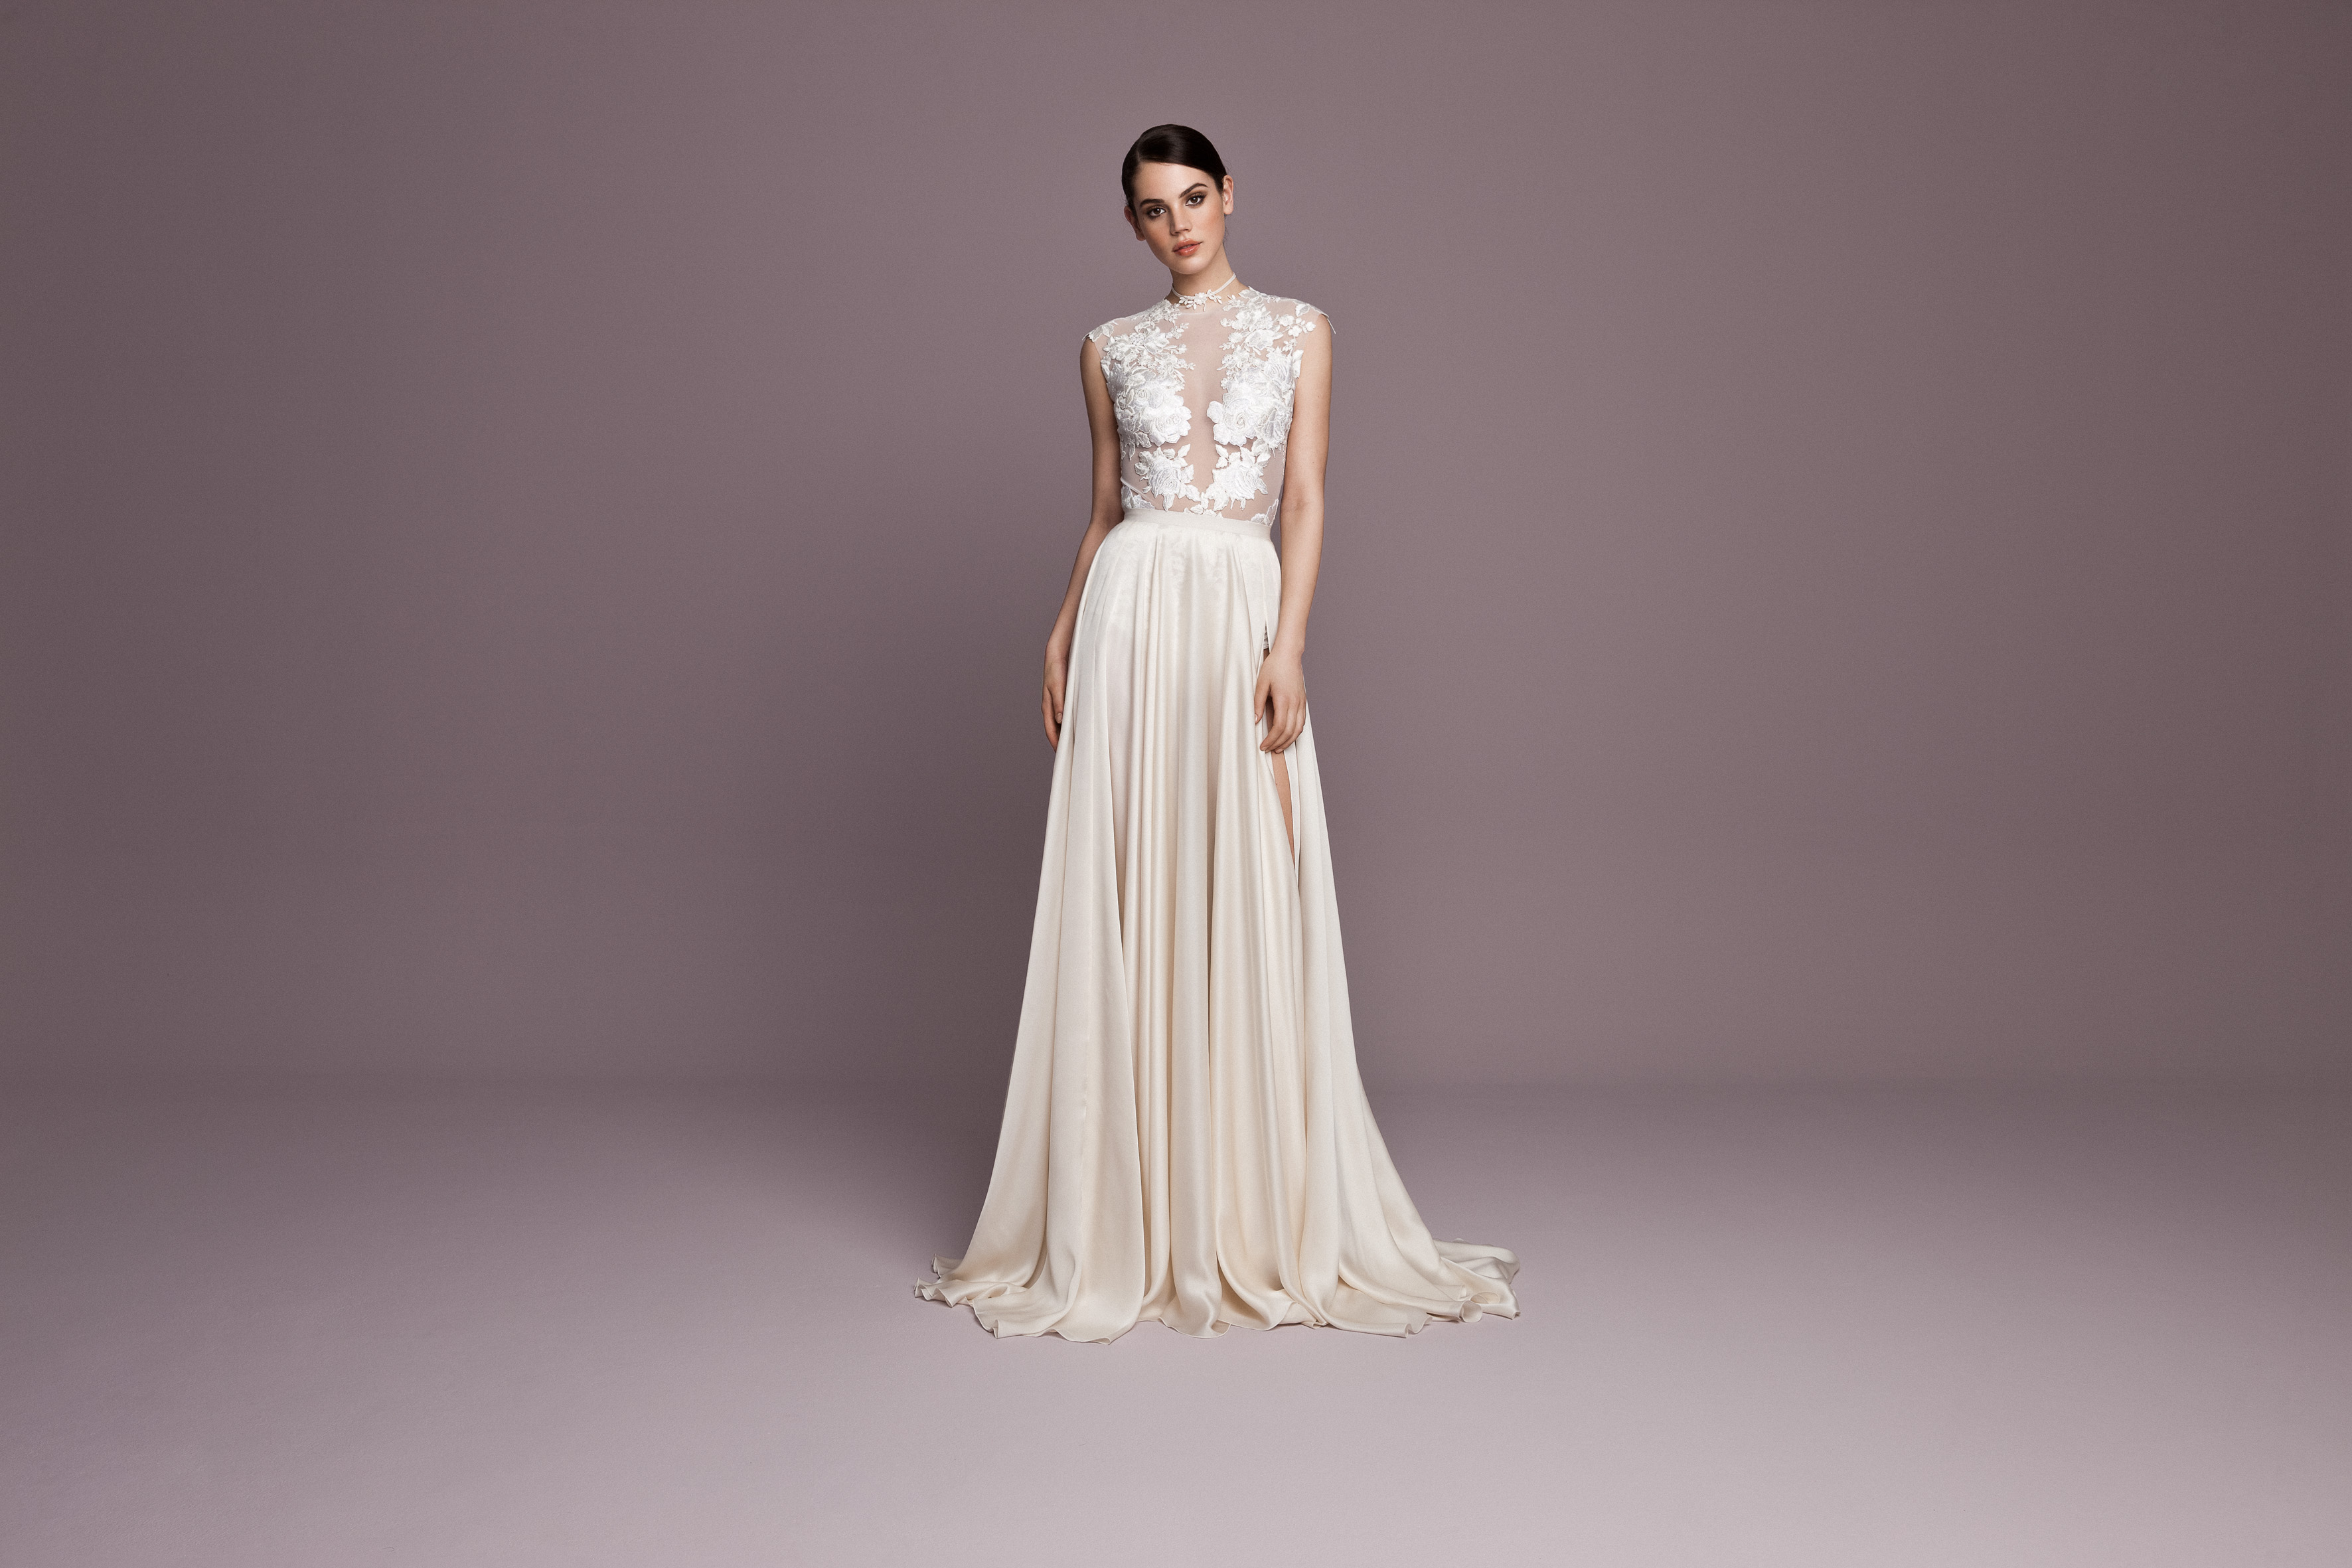 K'Mich Weddings - wedding planning - wedding dresses-white wedding dress - sunset collection - Daalarna Couture